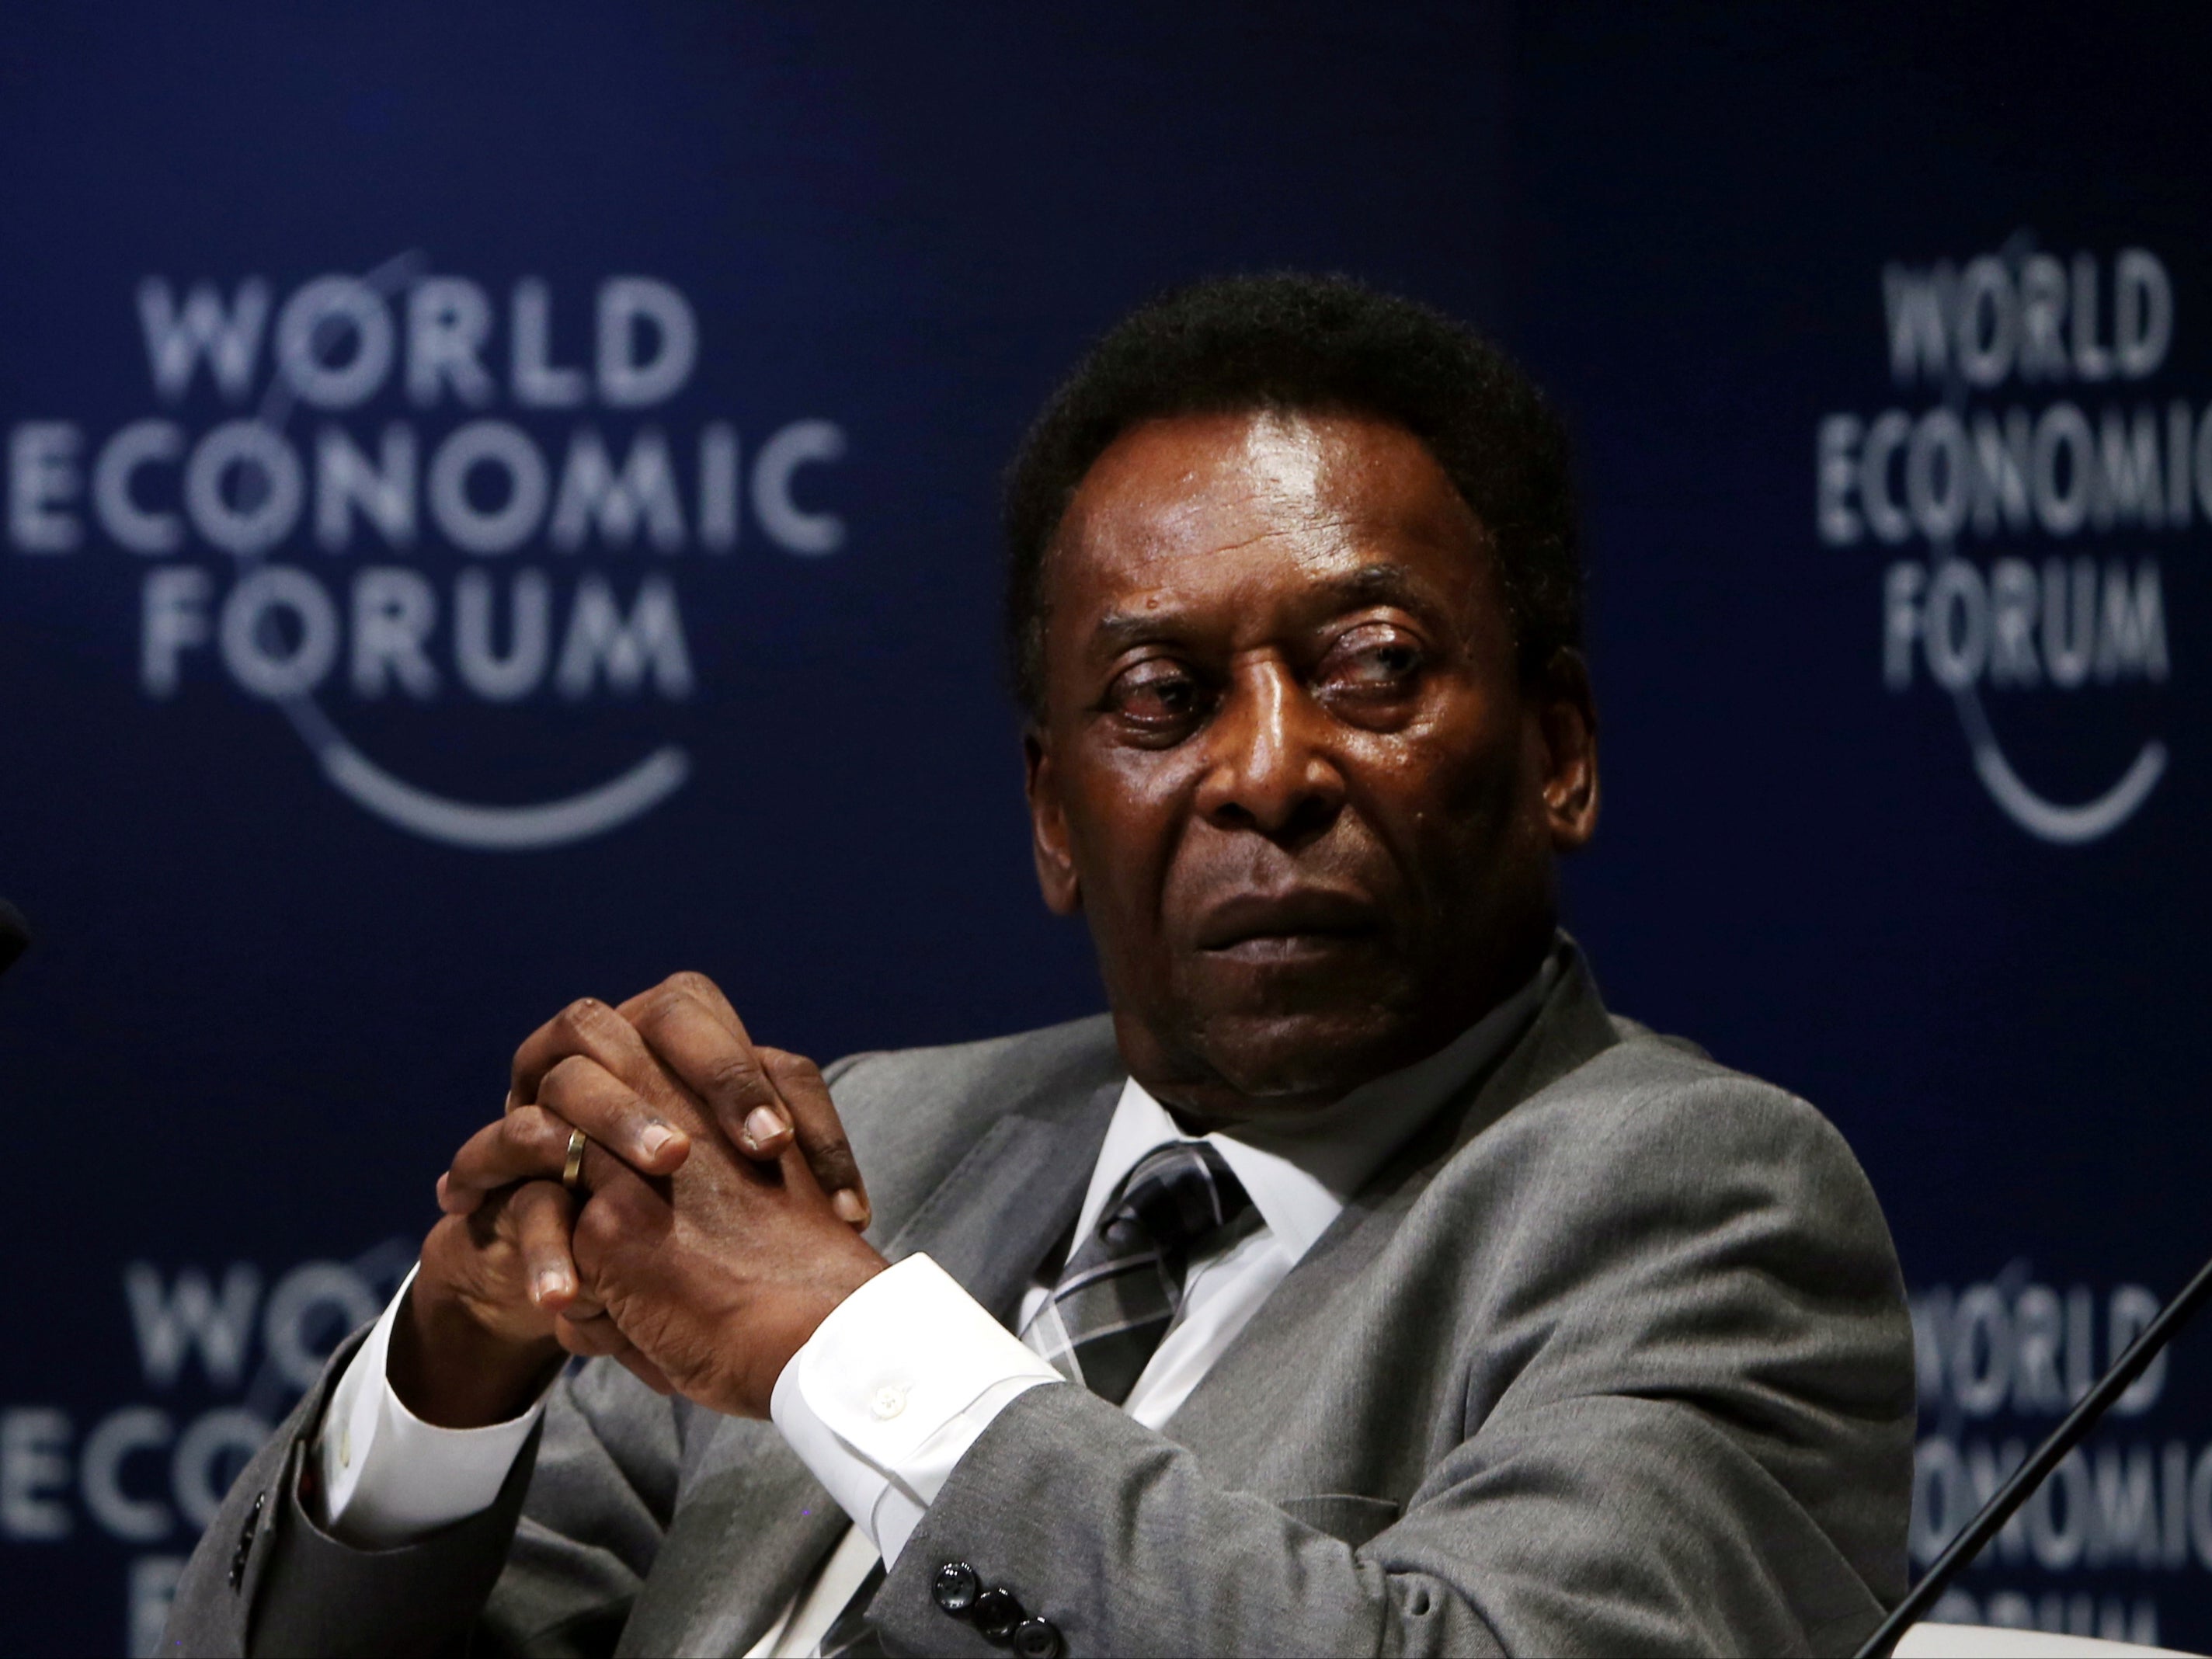 Pele will leave intensive care this week